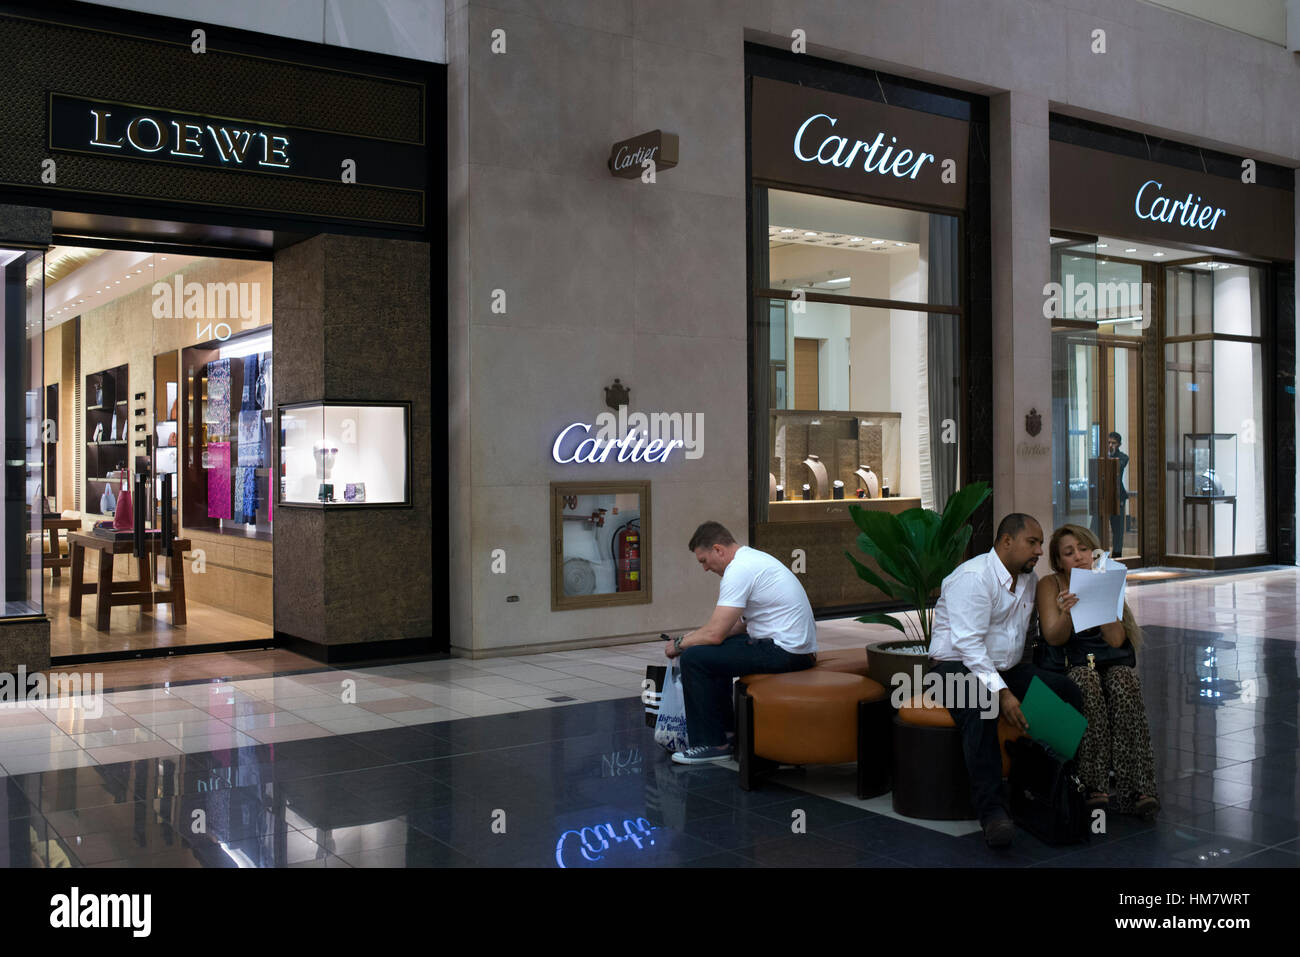 Panama Cartier loewe shops in Mall Multiplaza Pacific. Multiplaza Pacific is the most modern and exclusive mall in the region. It was developed with t Stock Photo